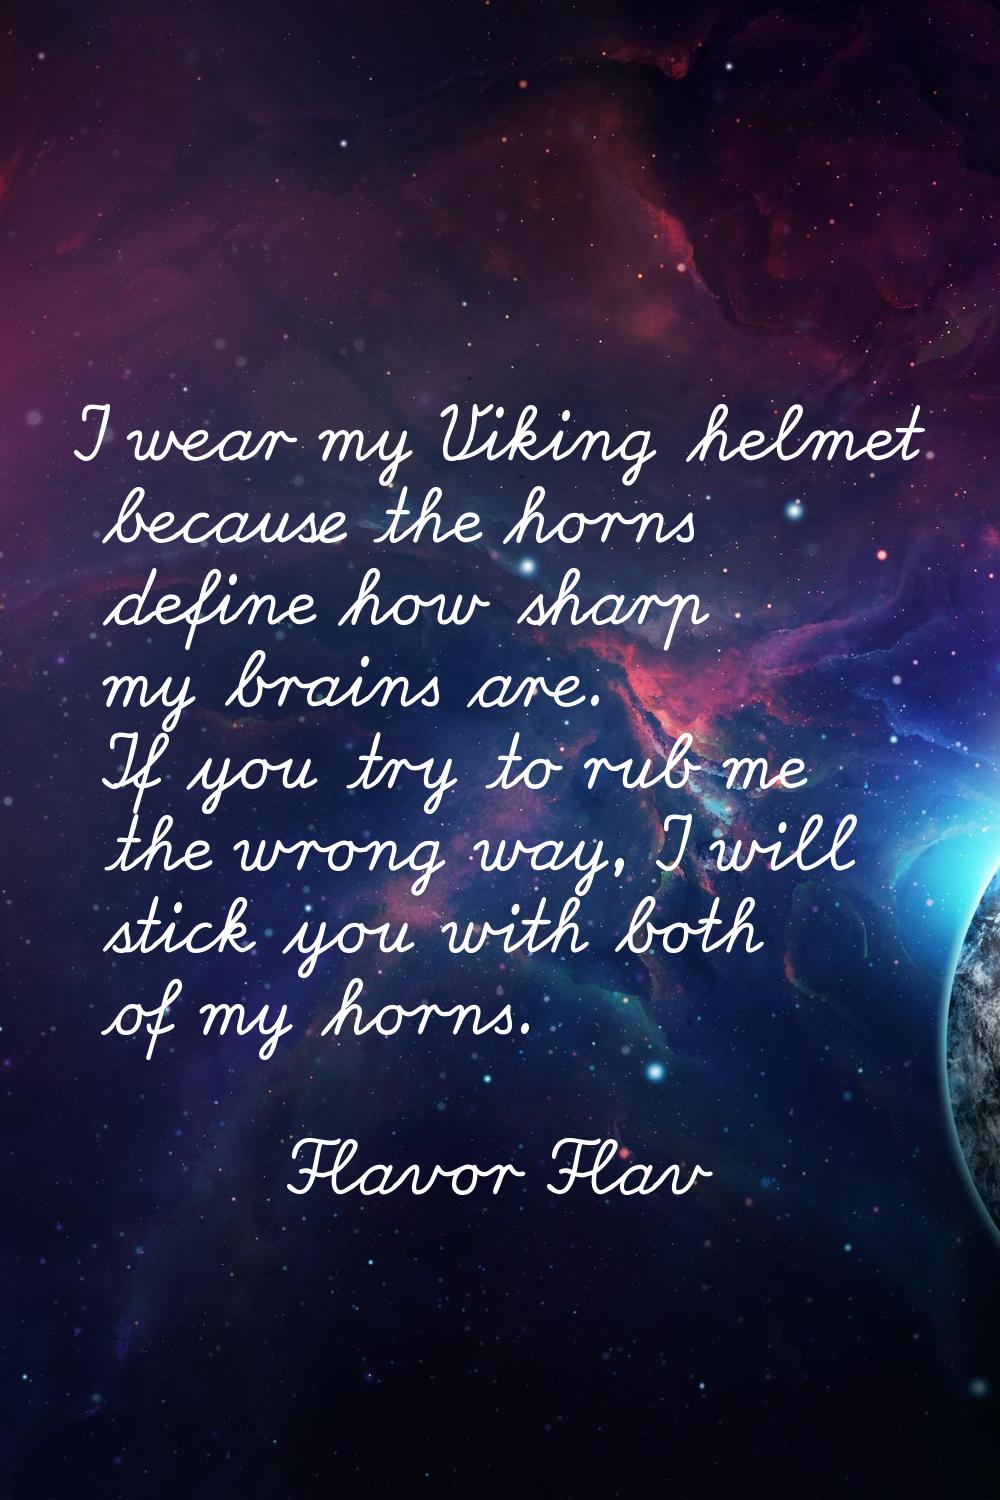 I wear my Viking helmet because the horns define how sharp my brains are. If you try to rub me the 